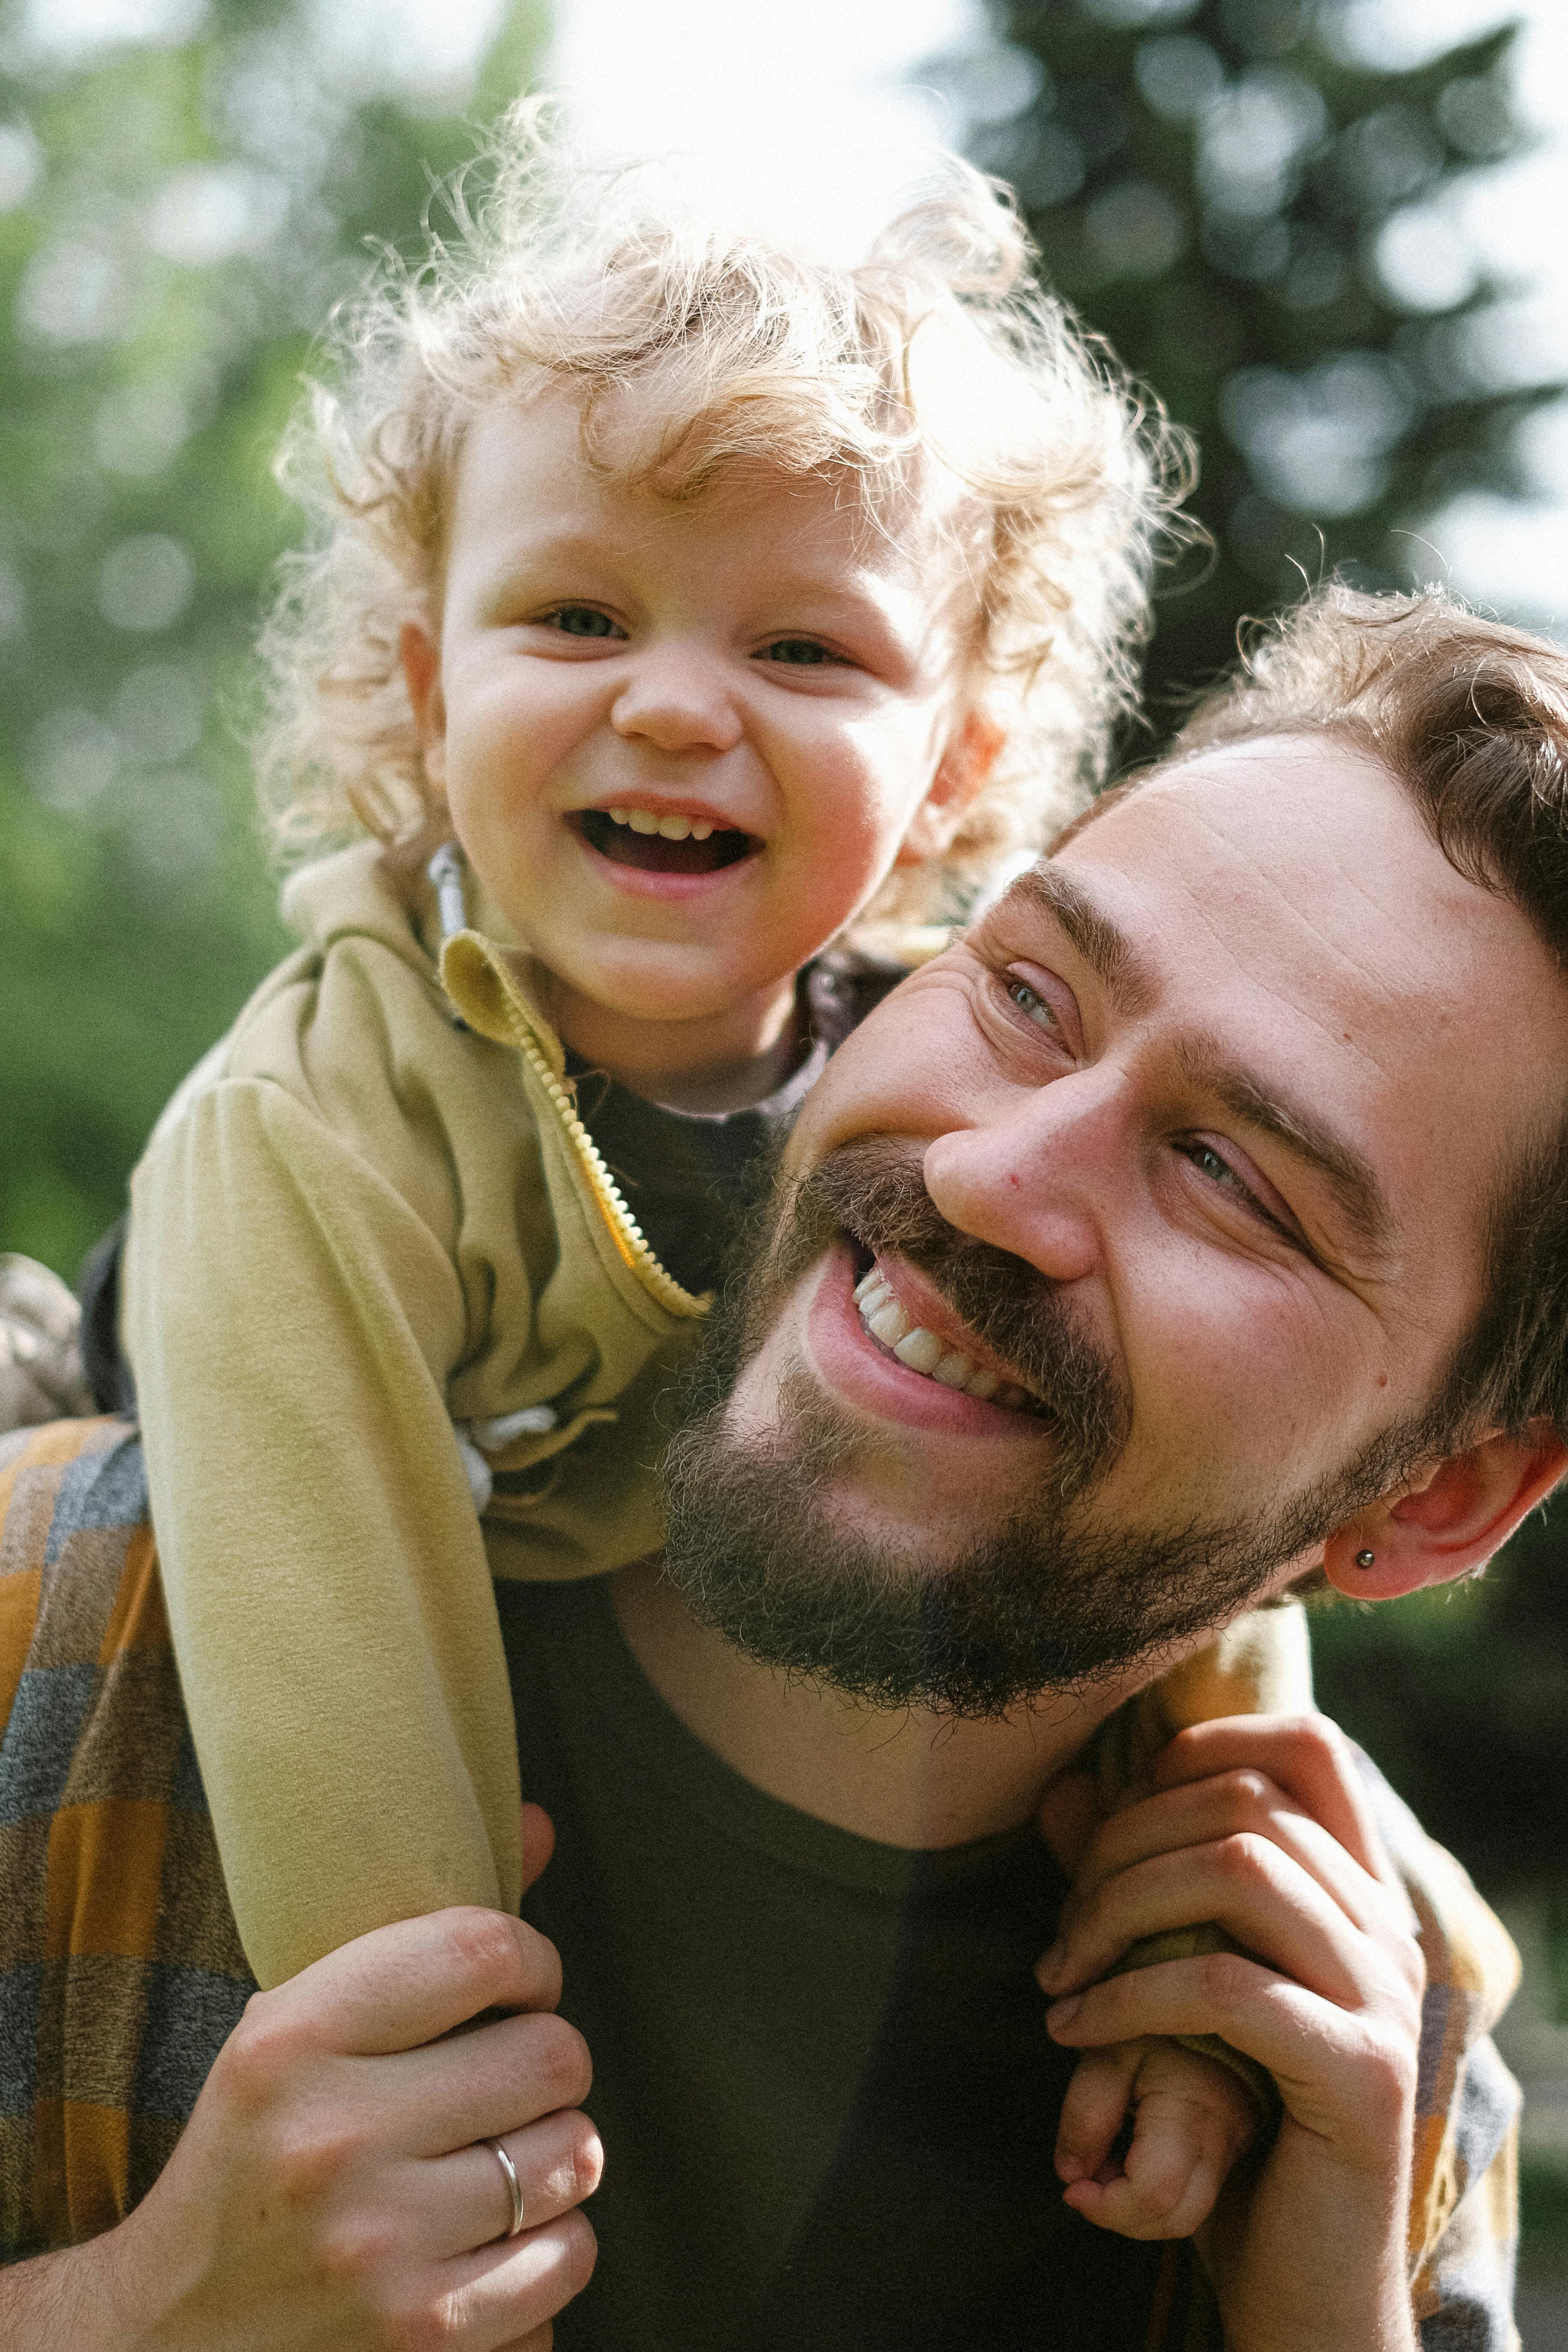 A man playing with his son | Source: Pexels